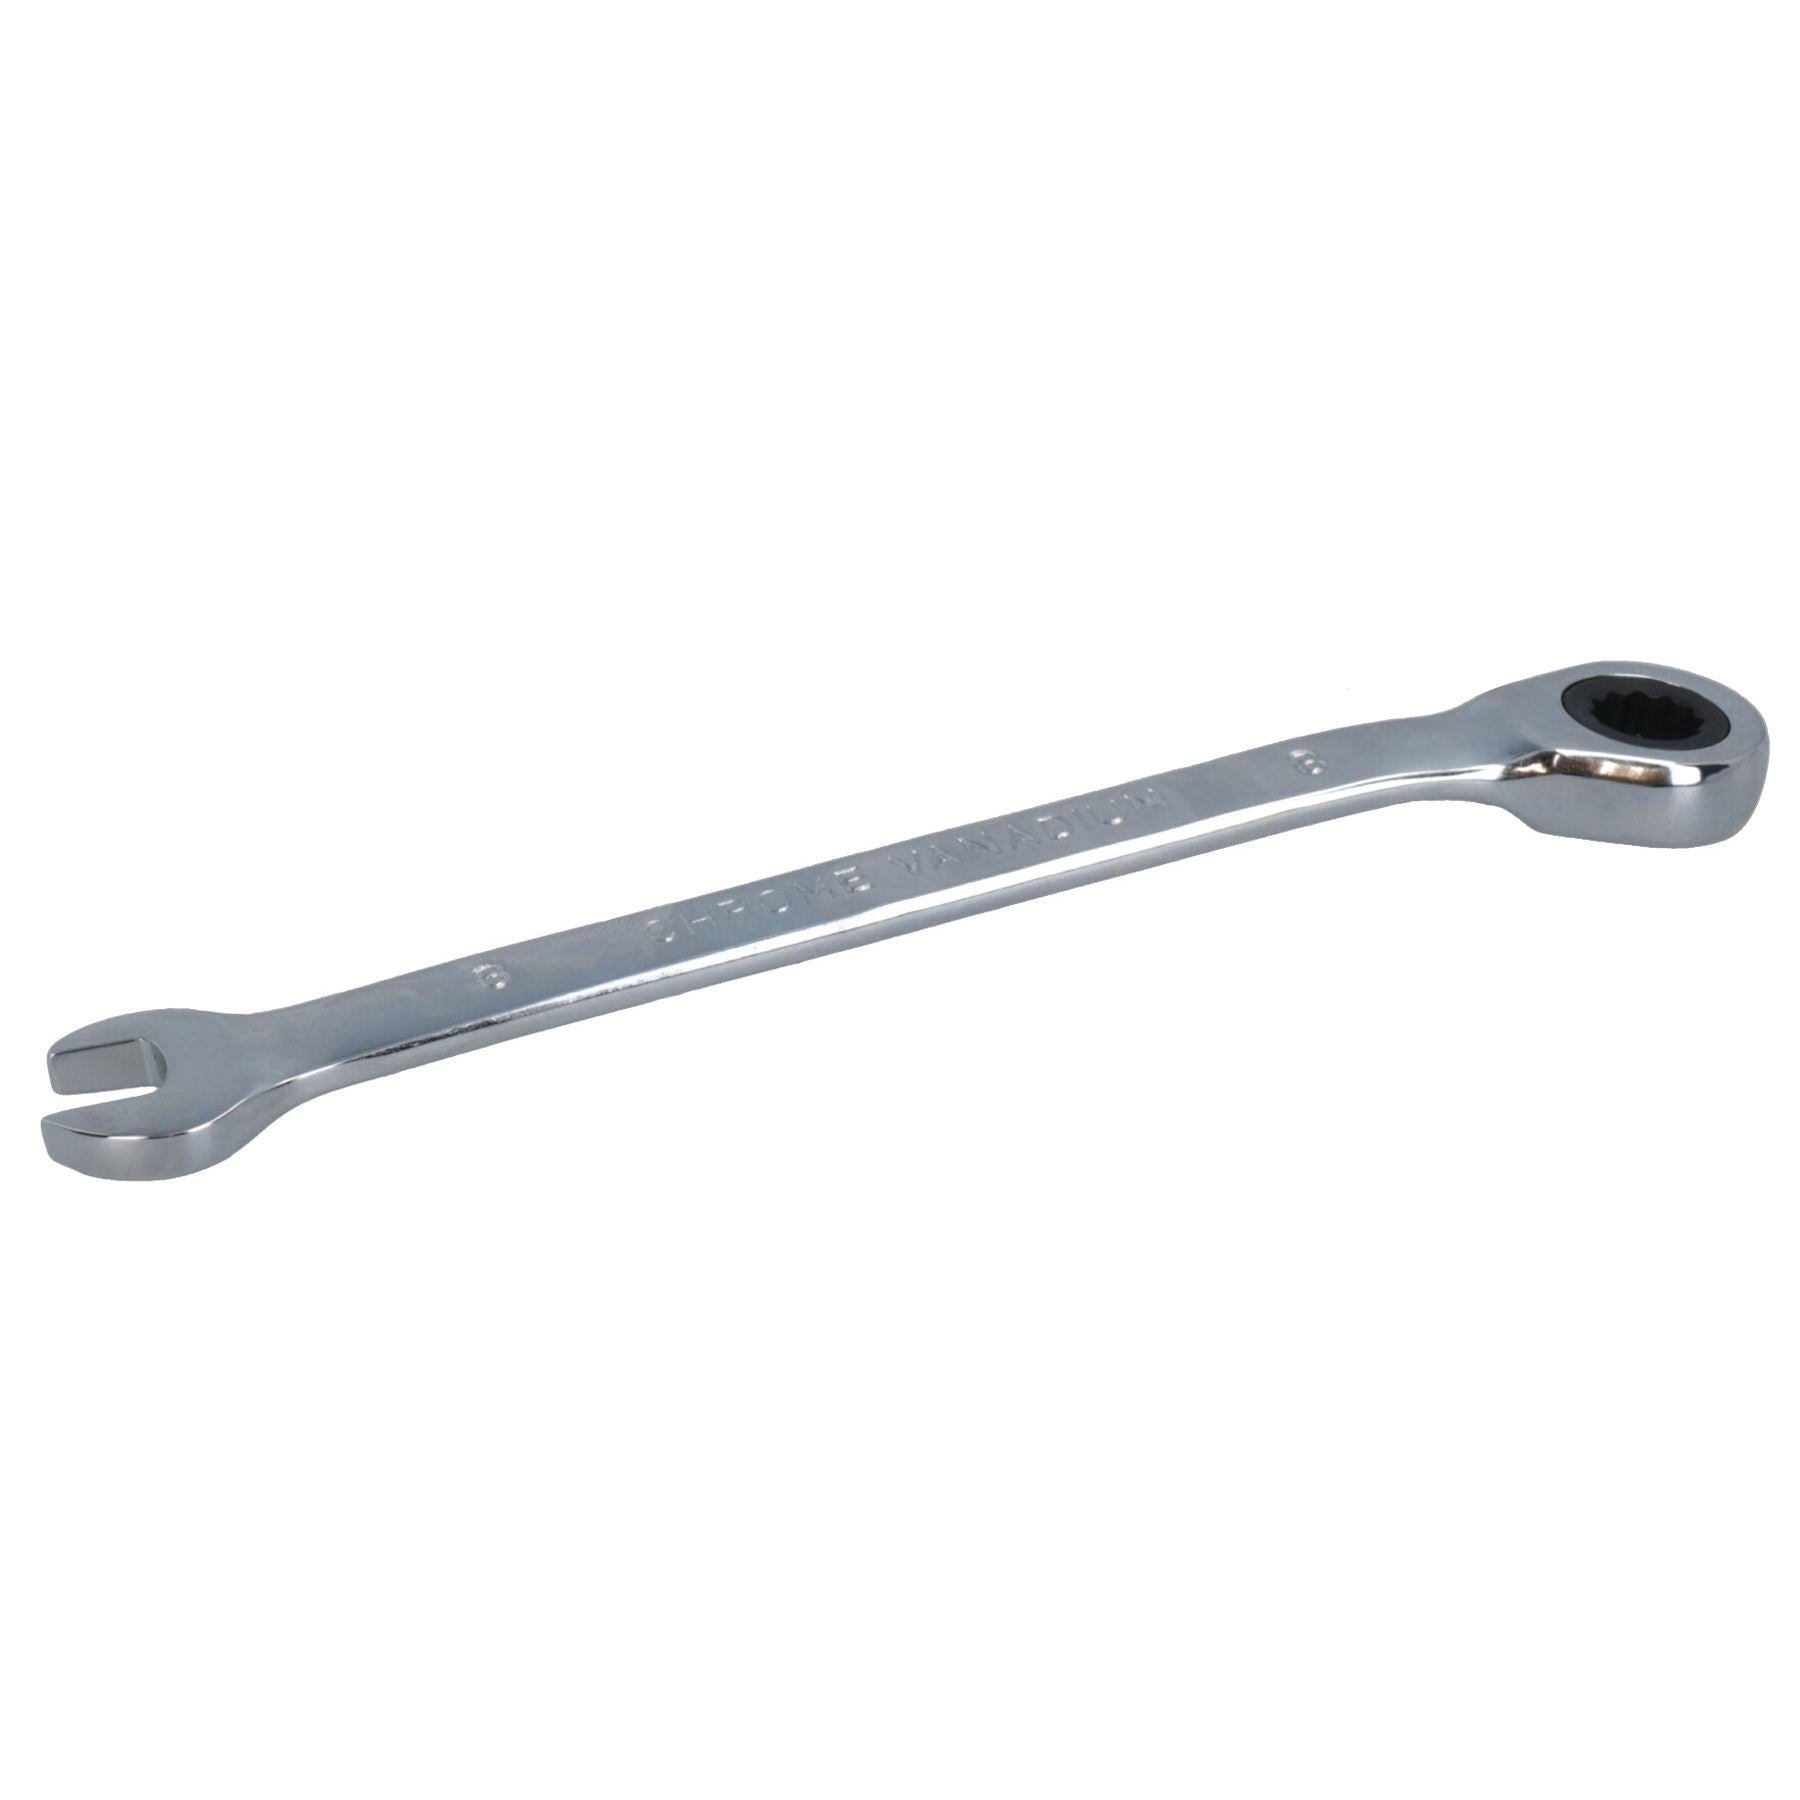 8mm Reversible Cranked Offset Ratchet Combination Spanner Wrench 72 Teeth